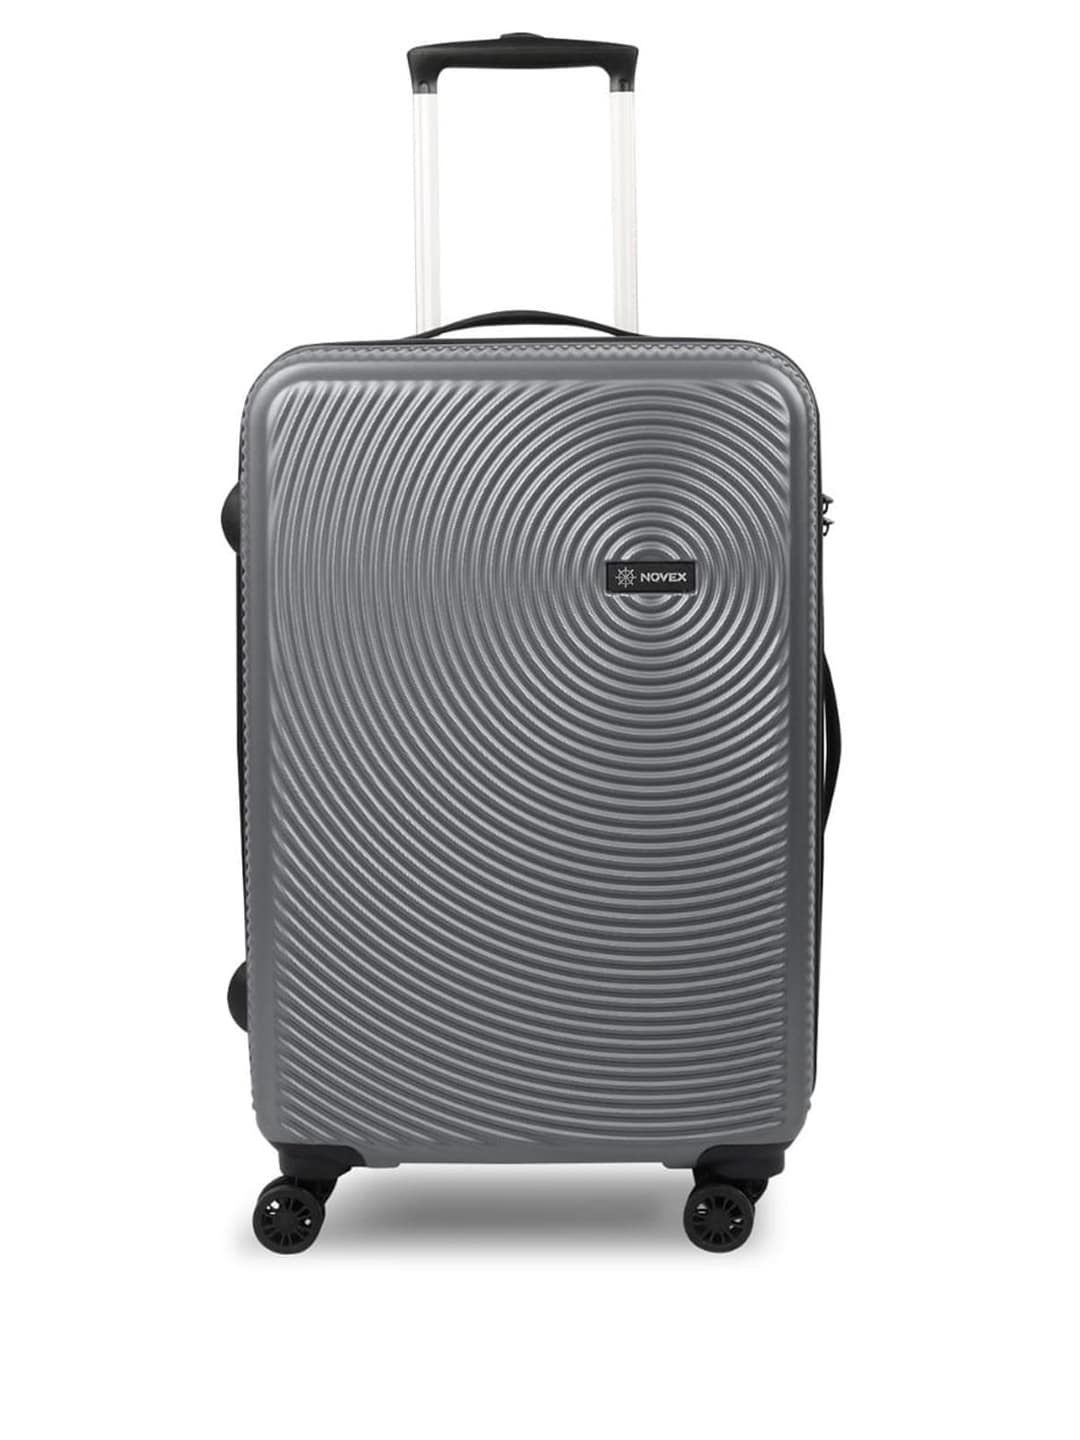 NOVEX Unisex Grey Textured Hard-Sided Cabin Suitcase Trolley Bag Price in India